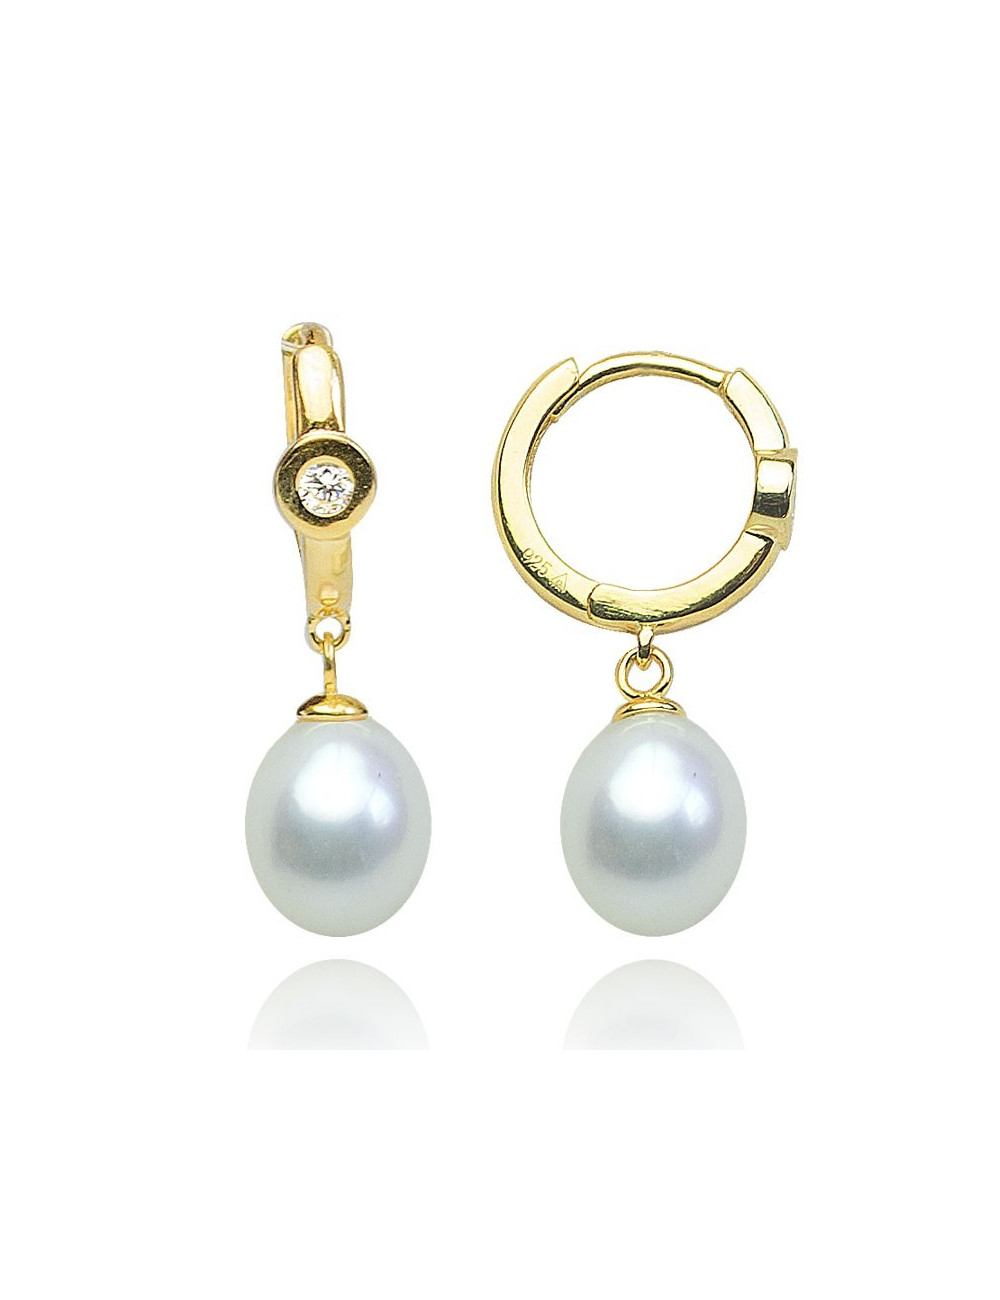 Silver earrings with white pearls KYA1668S